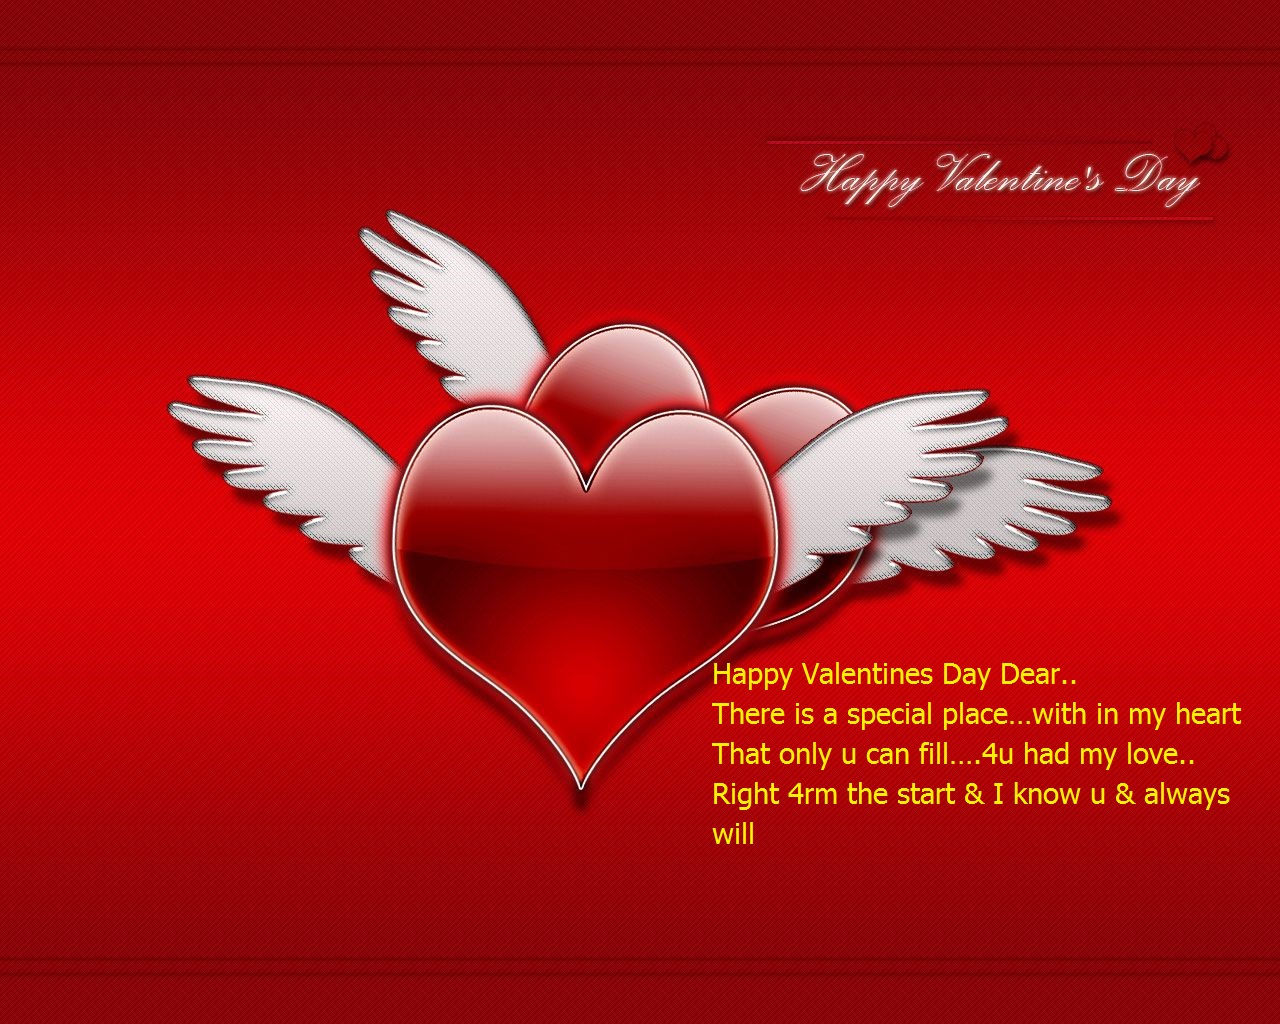 happy-valentine-s-day-wishes-for-you-love-spouse-friends